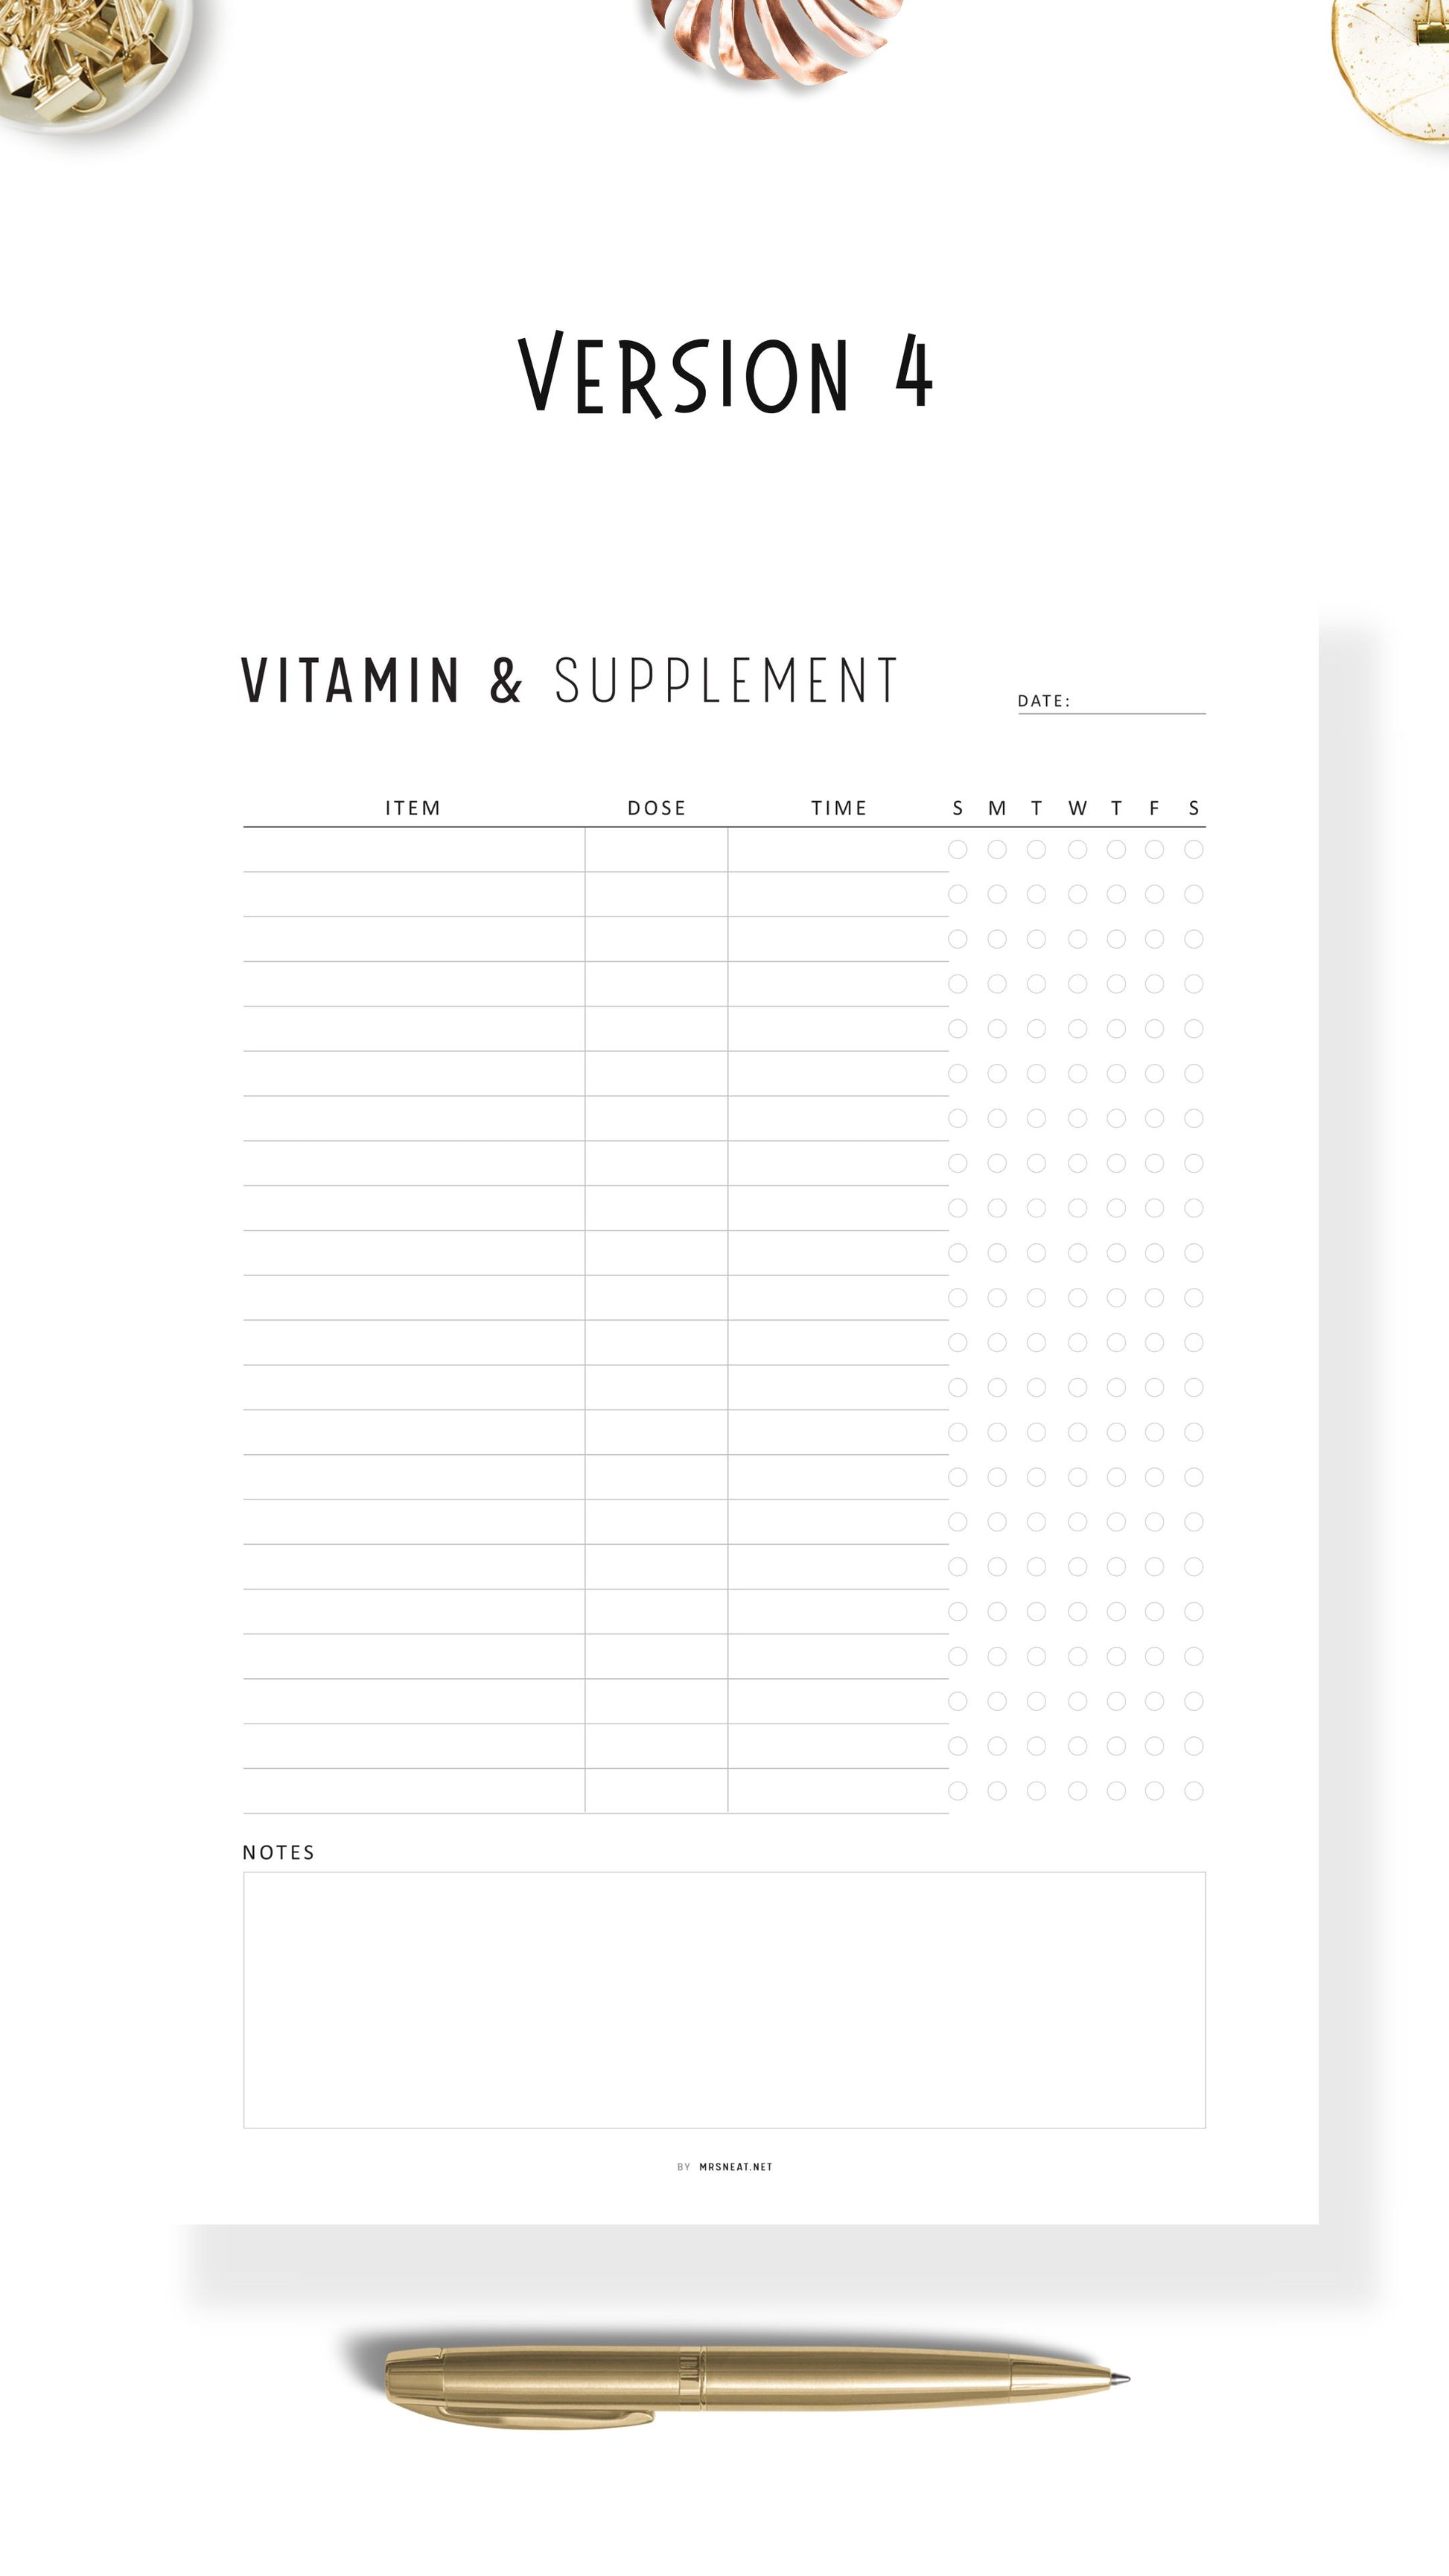 Daily Vitamin & Supplements Tracker Printable, A4, A5, Letter, Half Letter, Digital Planner, Sunday and Monday start included, 4 versions